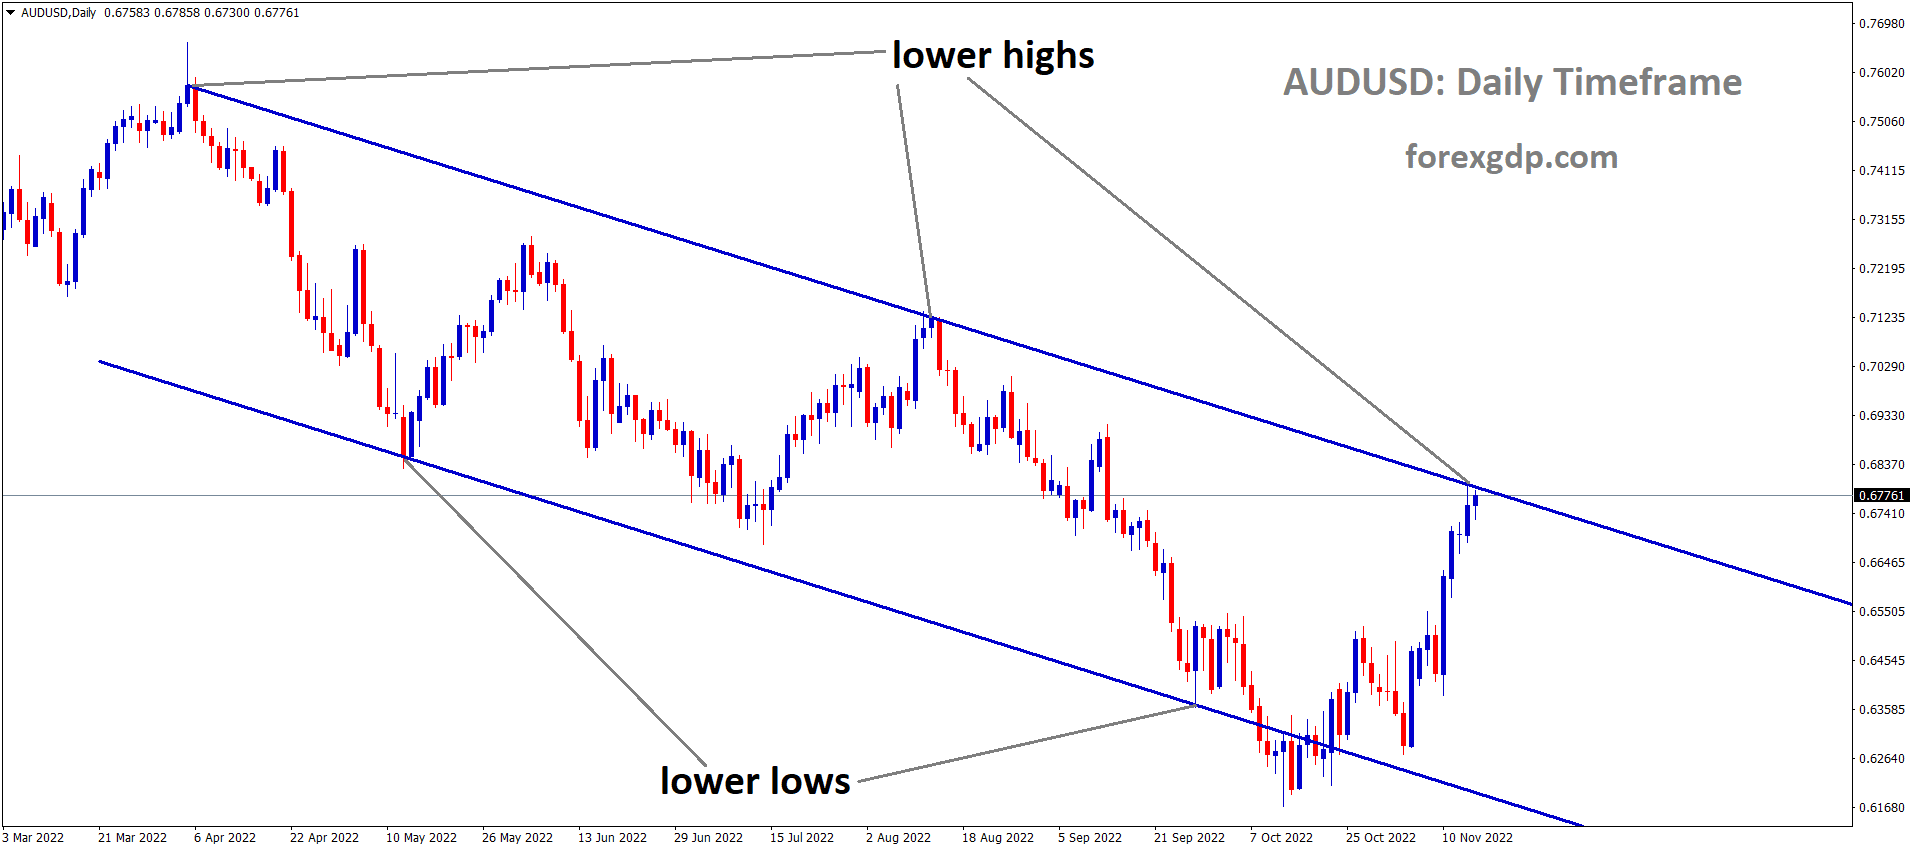 AUDUSD is moving in the Descending channel and the market has reached the lower high area of the channel 3